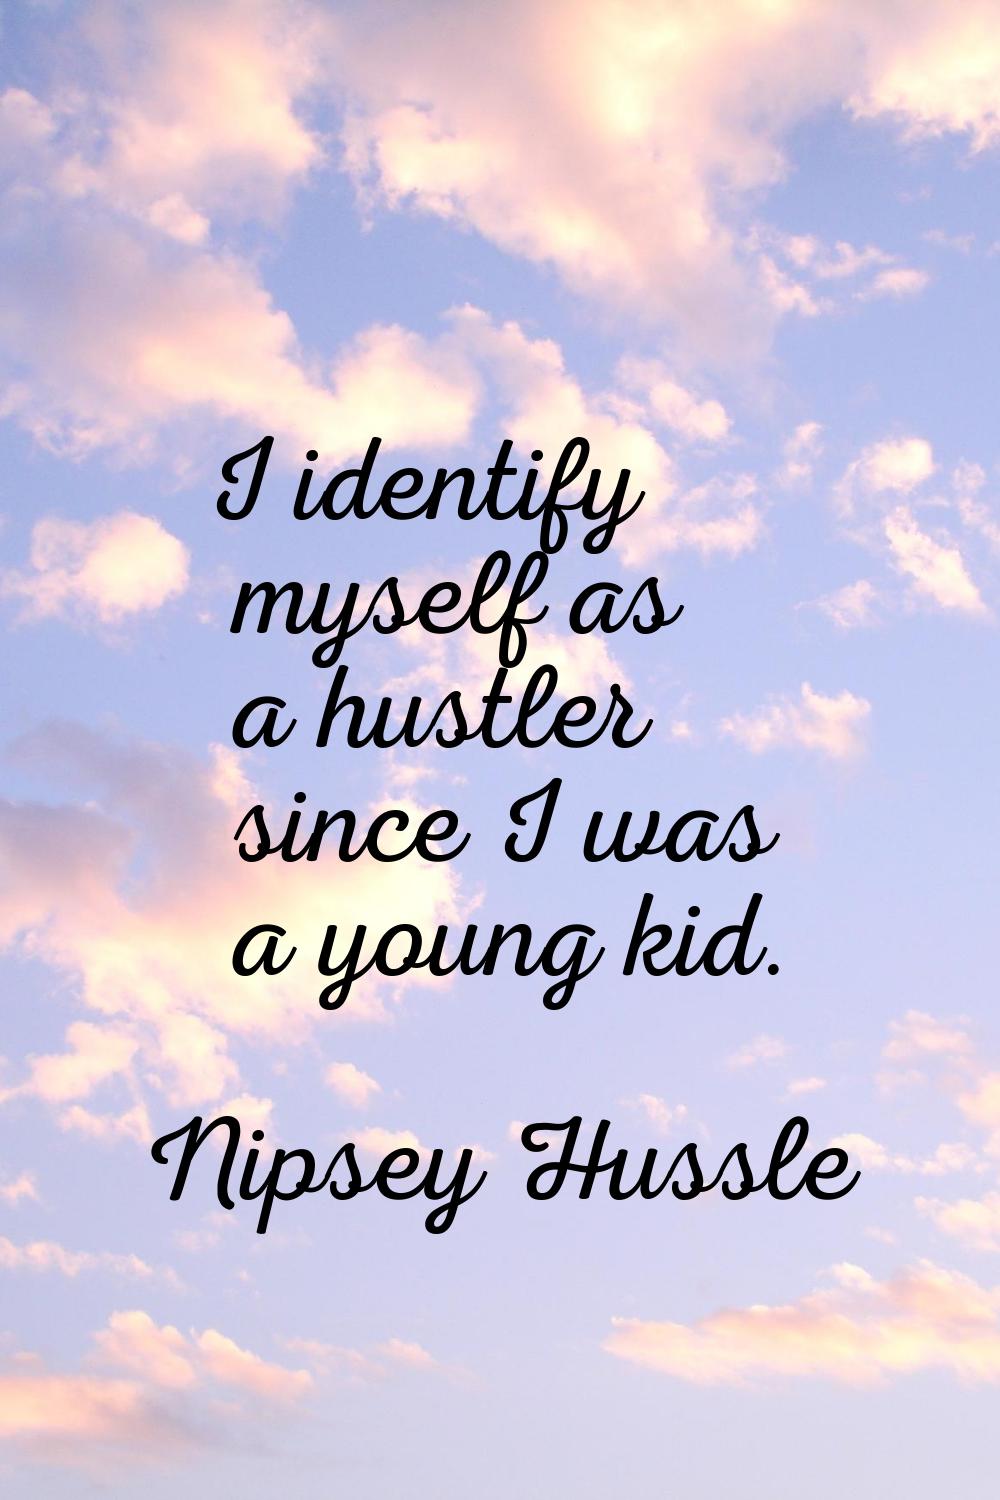 I identify myself as a hustler since I was a young kid.